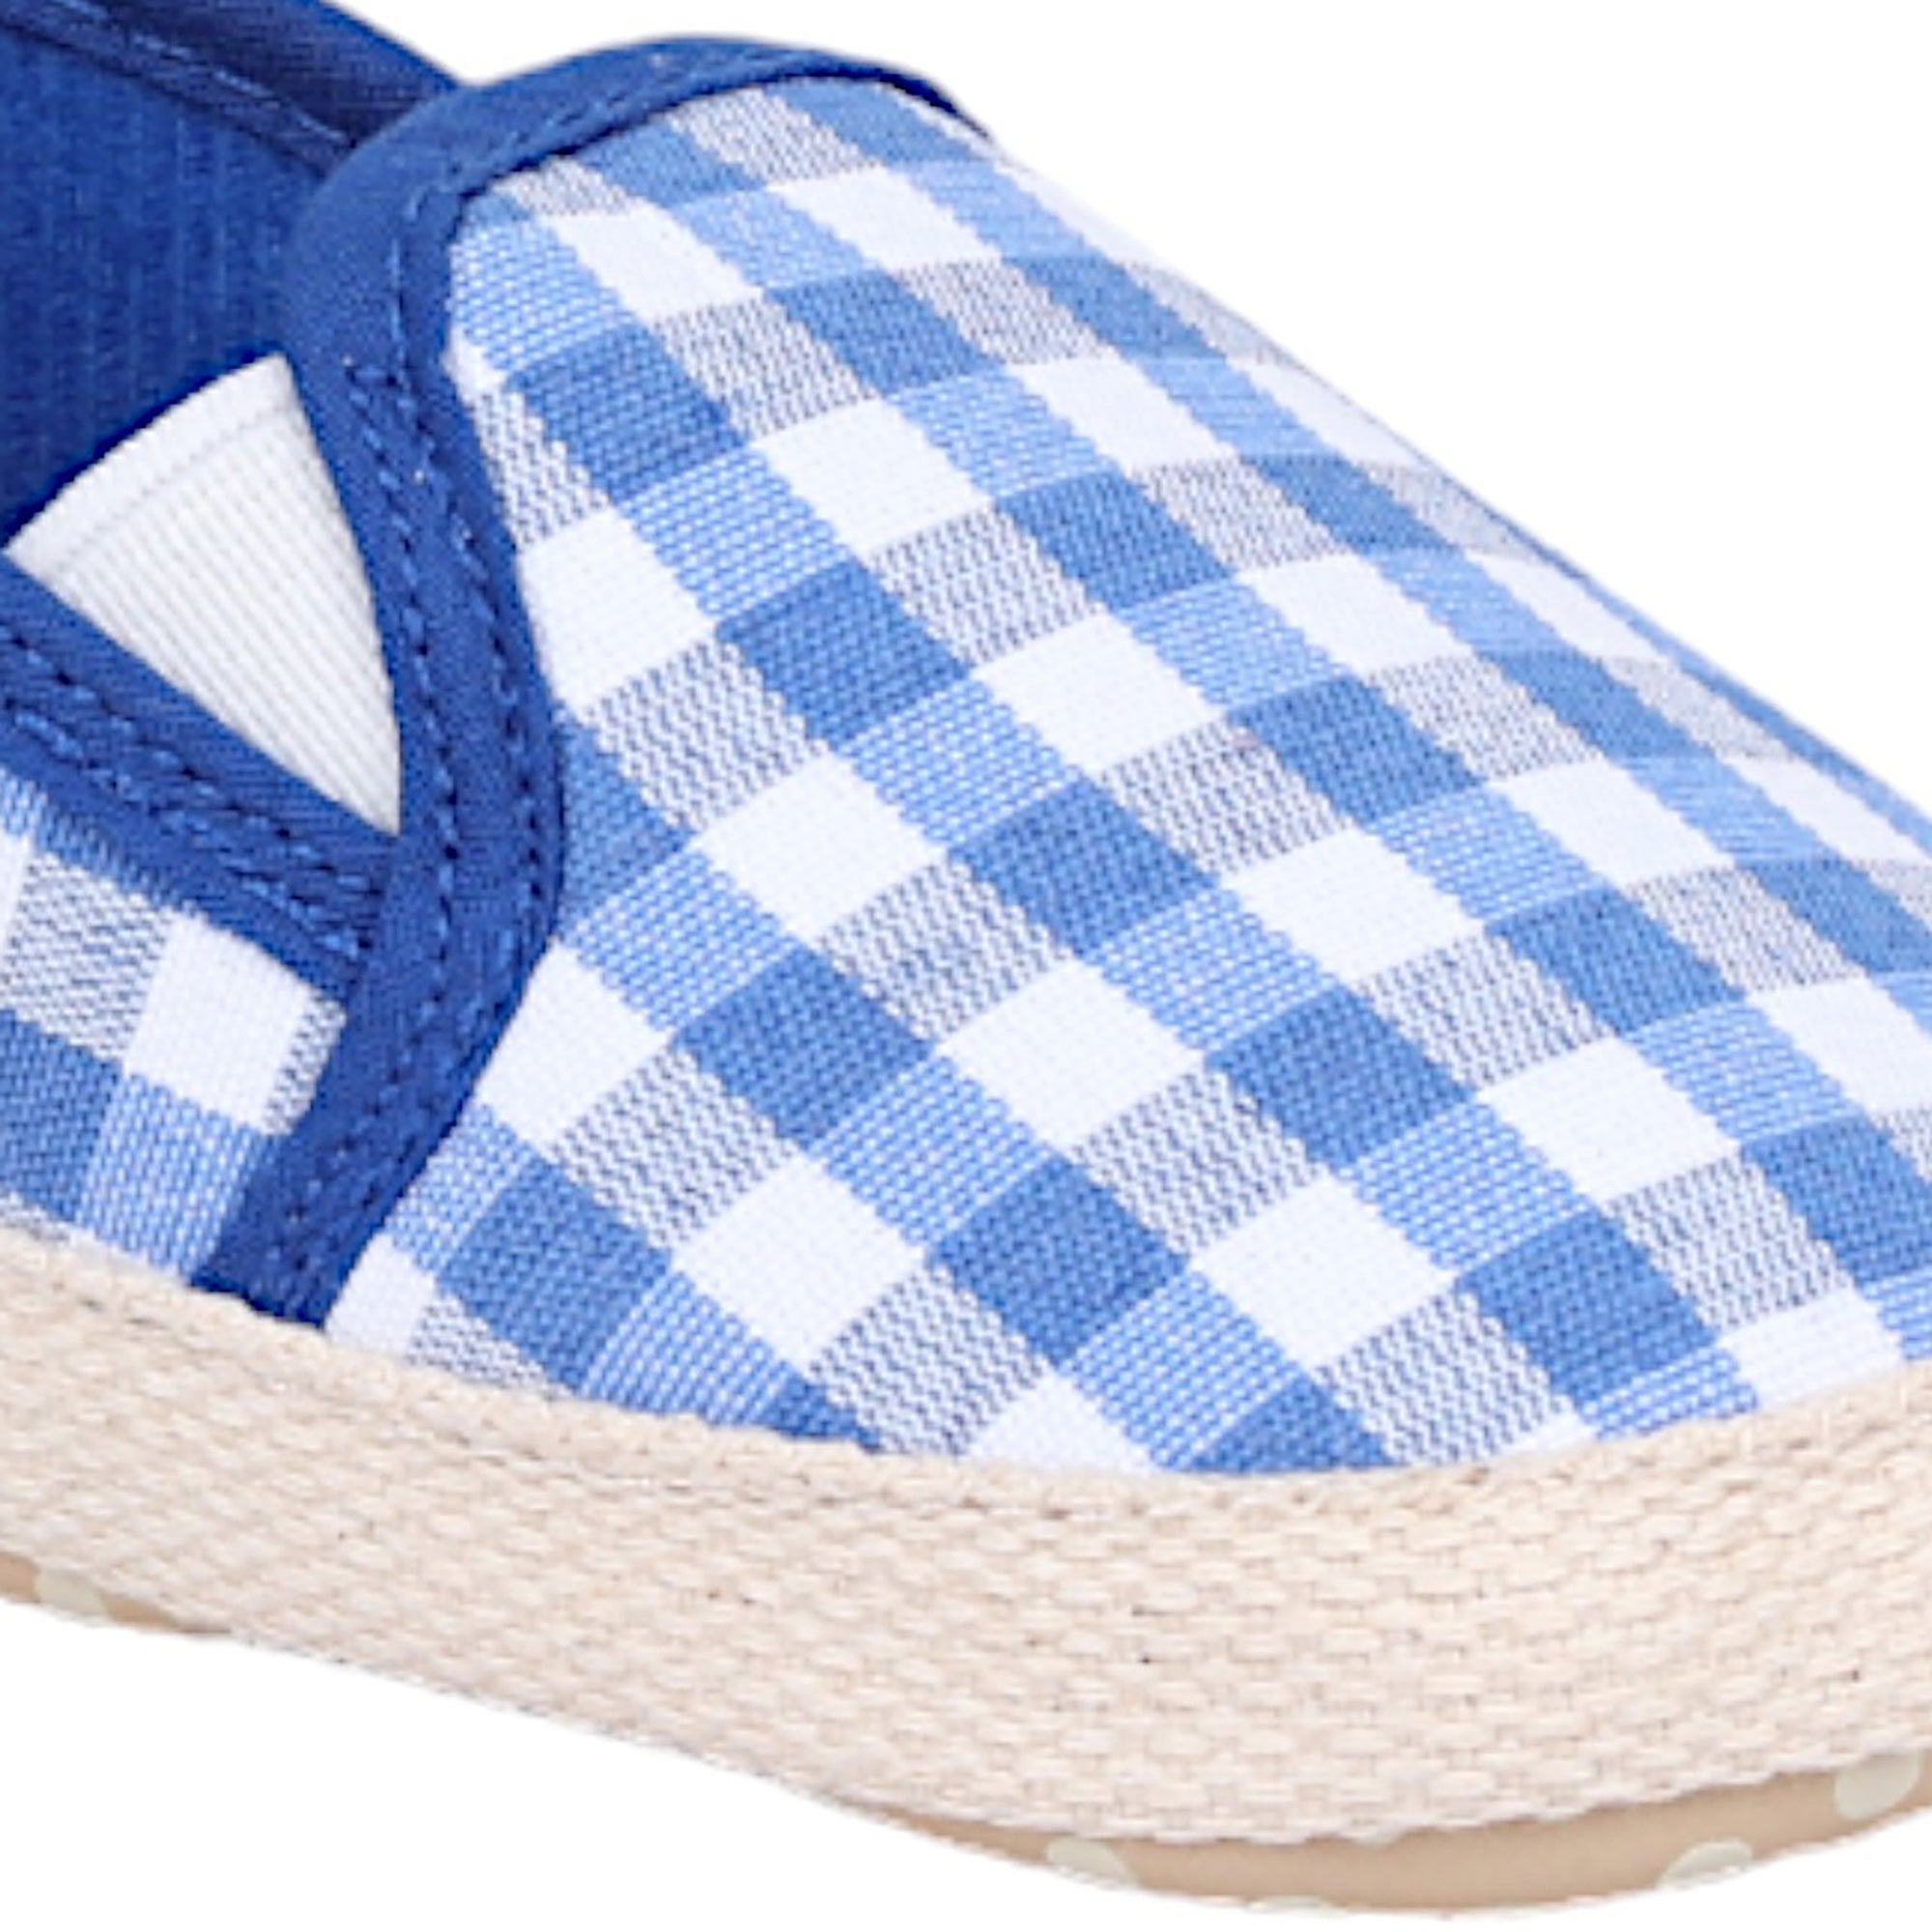 Baby Moo Classic Checkerboard Comfortable Slip-On Anti-Skid Canvas Sneakers - Blue